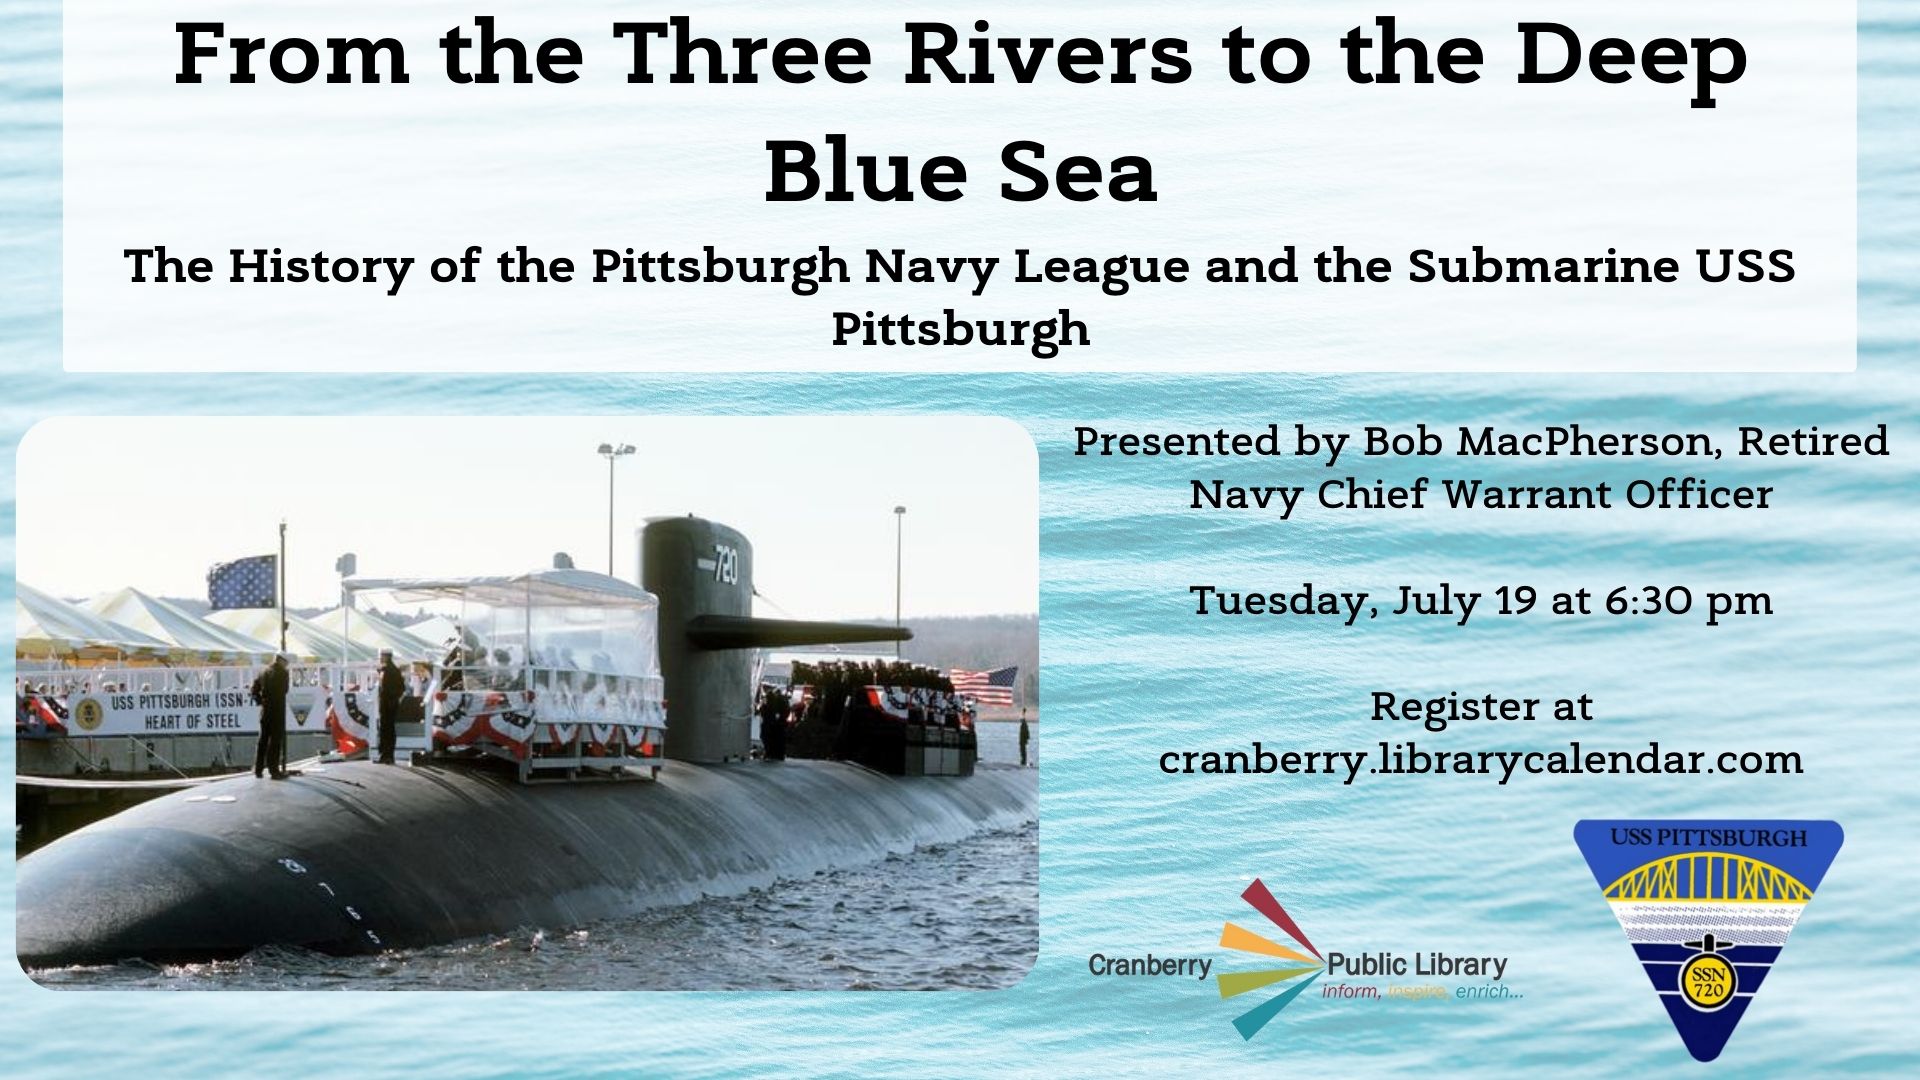 Flyer for From the Three Rivers to the Deep Blue Sea program